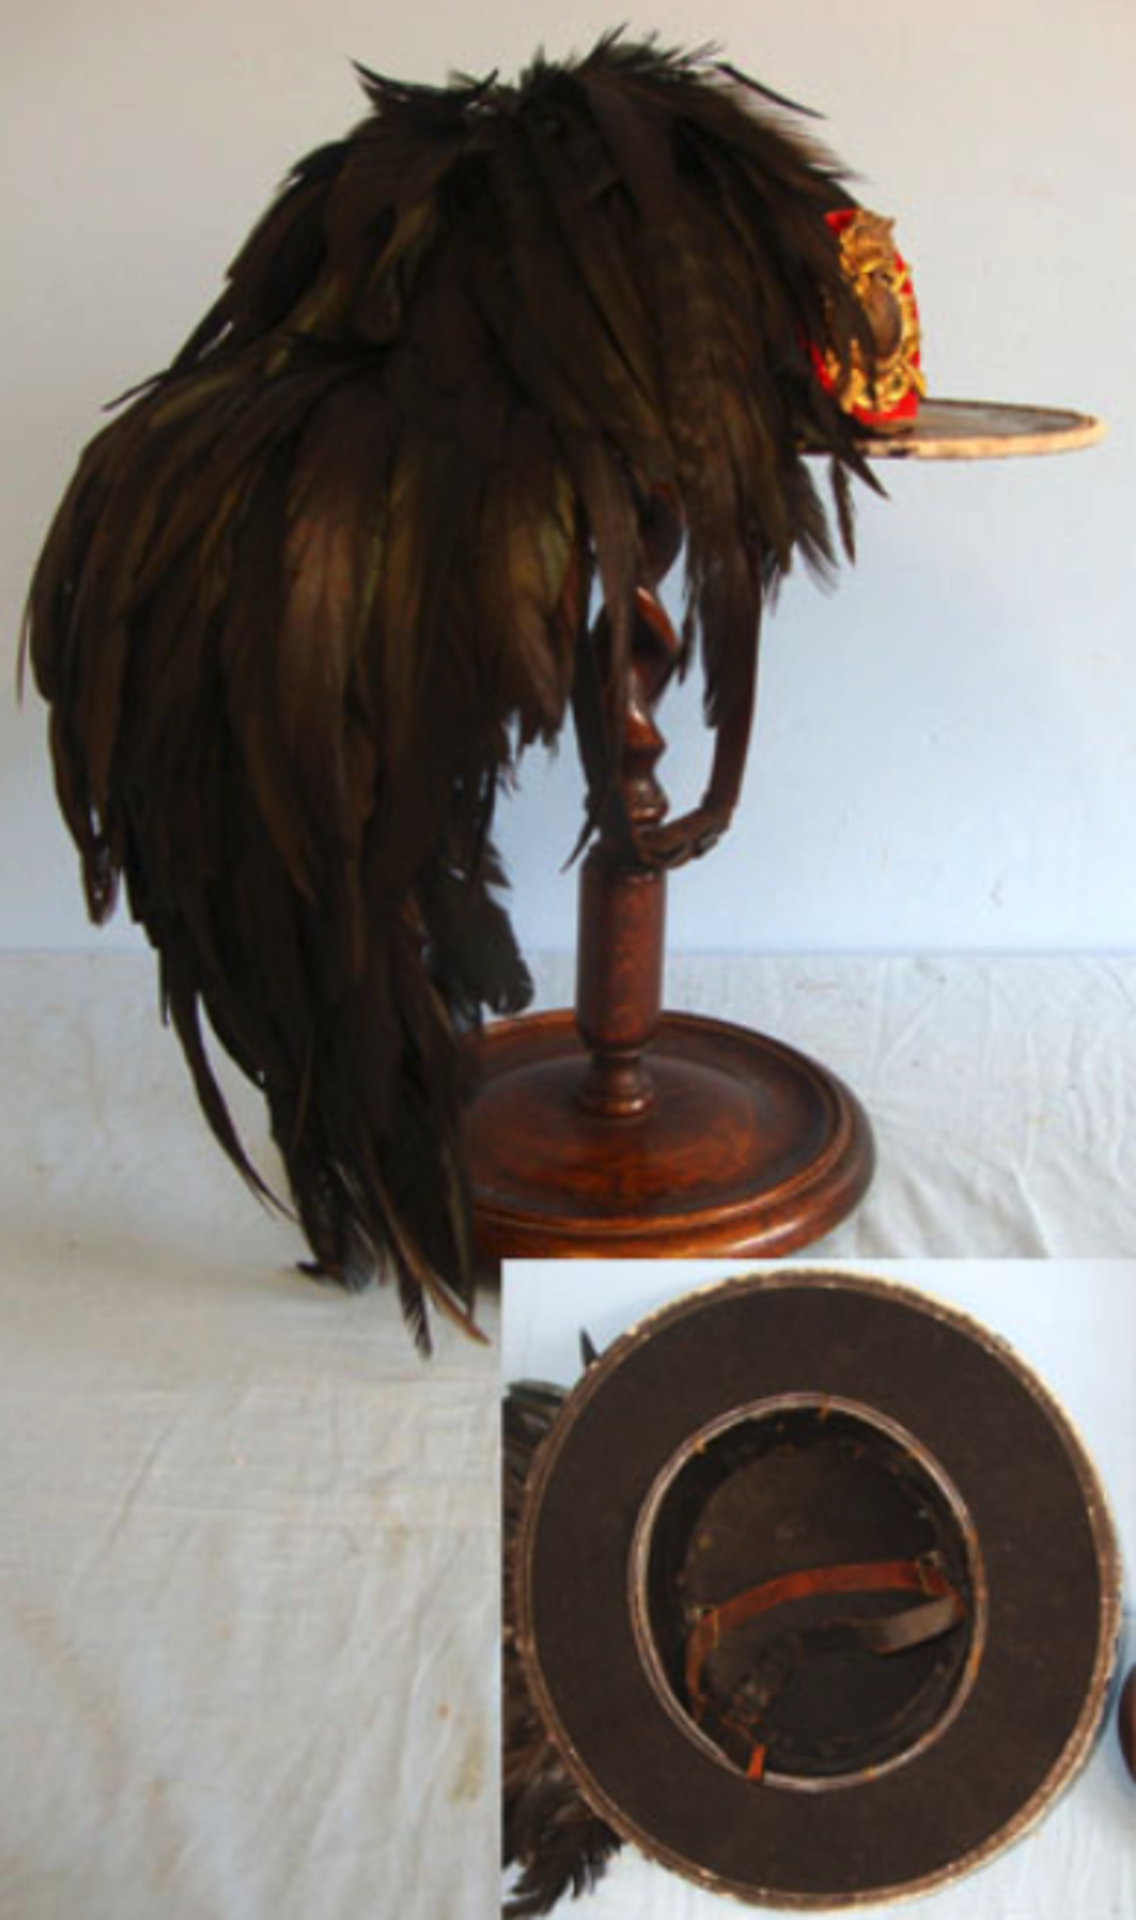 WW2 Era Bersaglieri Light Infantry Hat With 1st Bersaglieri Plate & Black Capercaillie Feather - Image 2 of 3